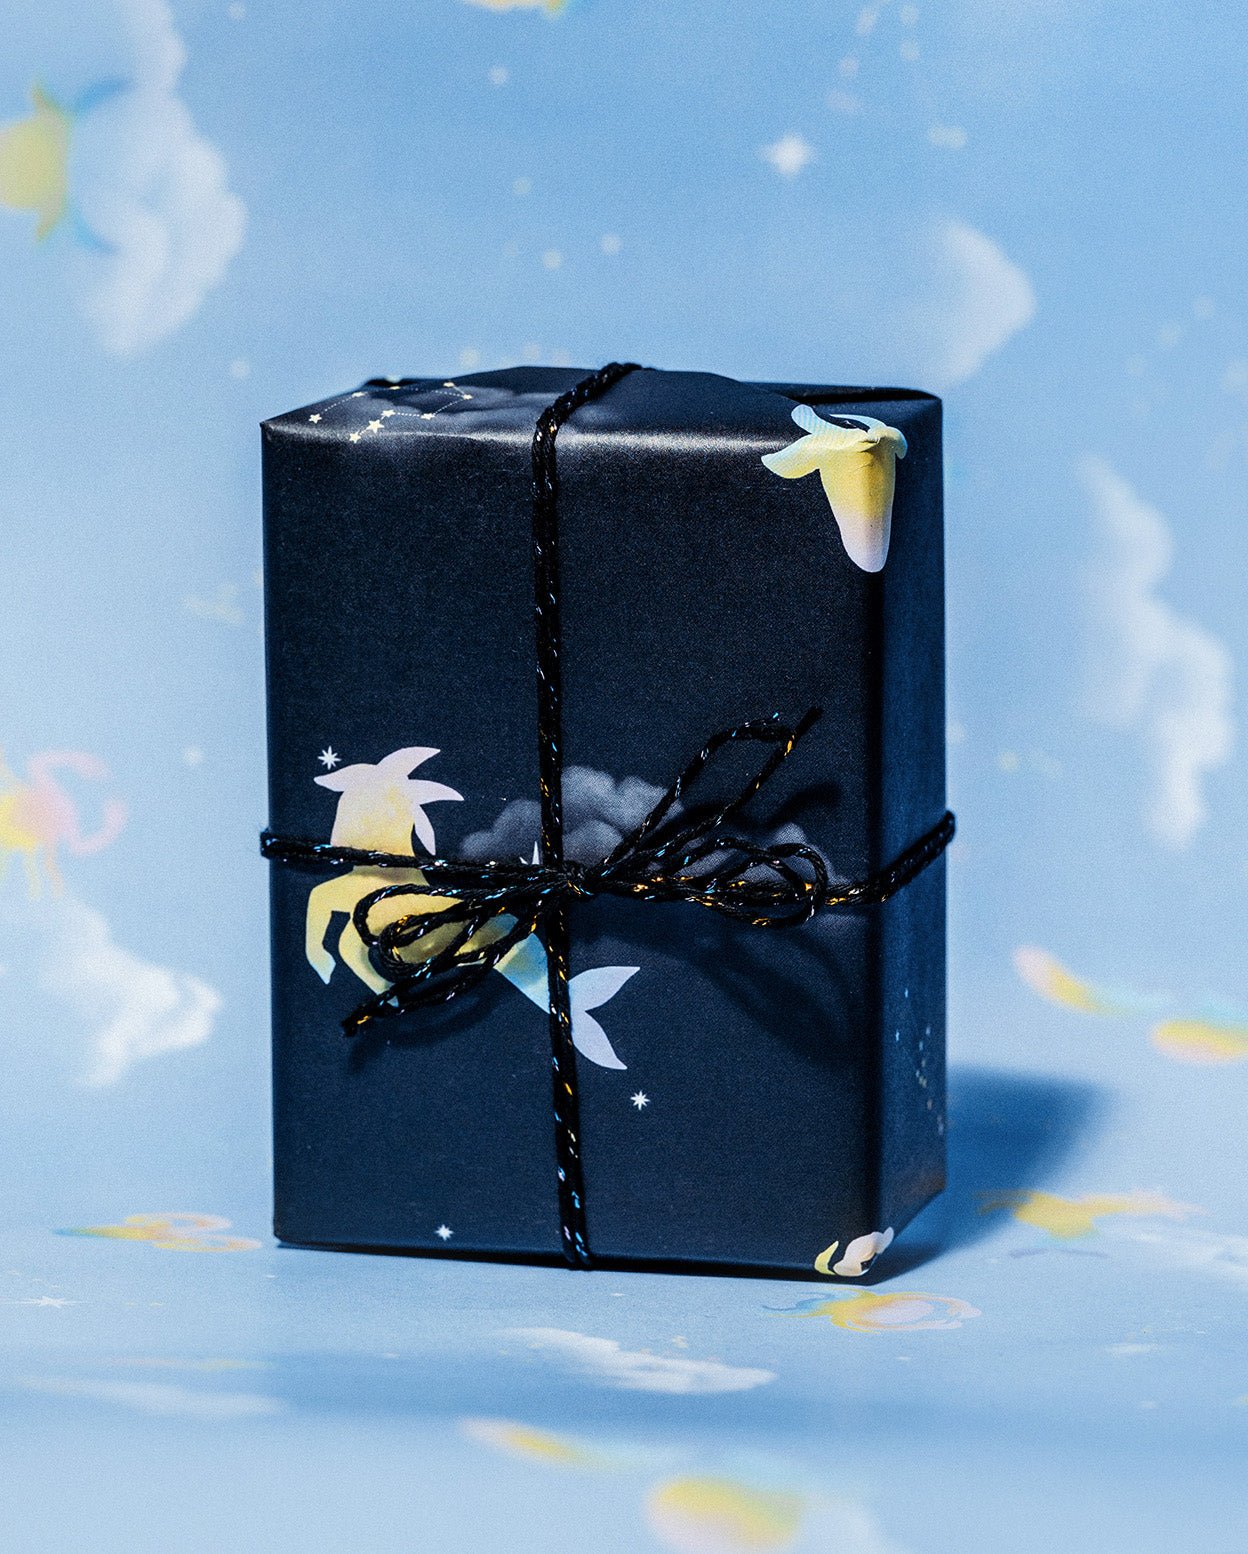 Black horoscope gift wrap tied with black and white string against a blue sky background with clouds.